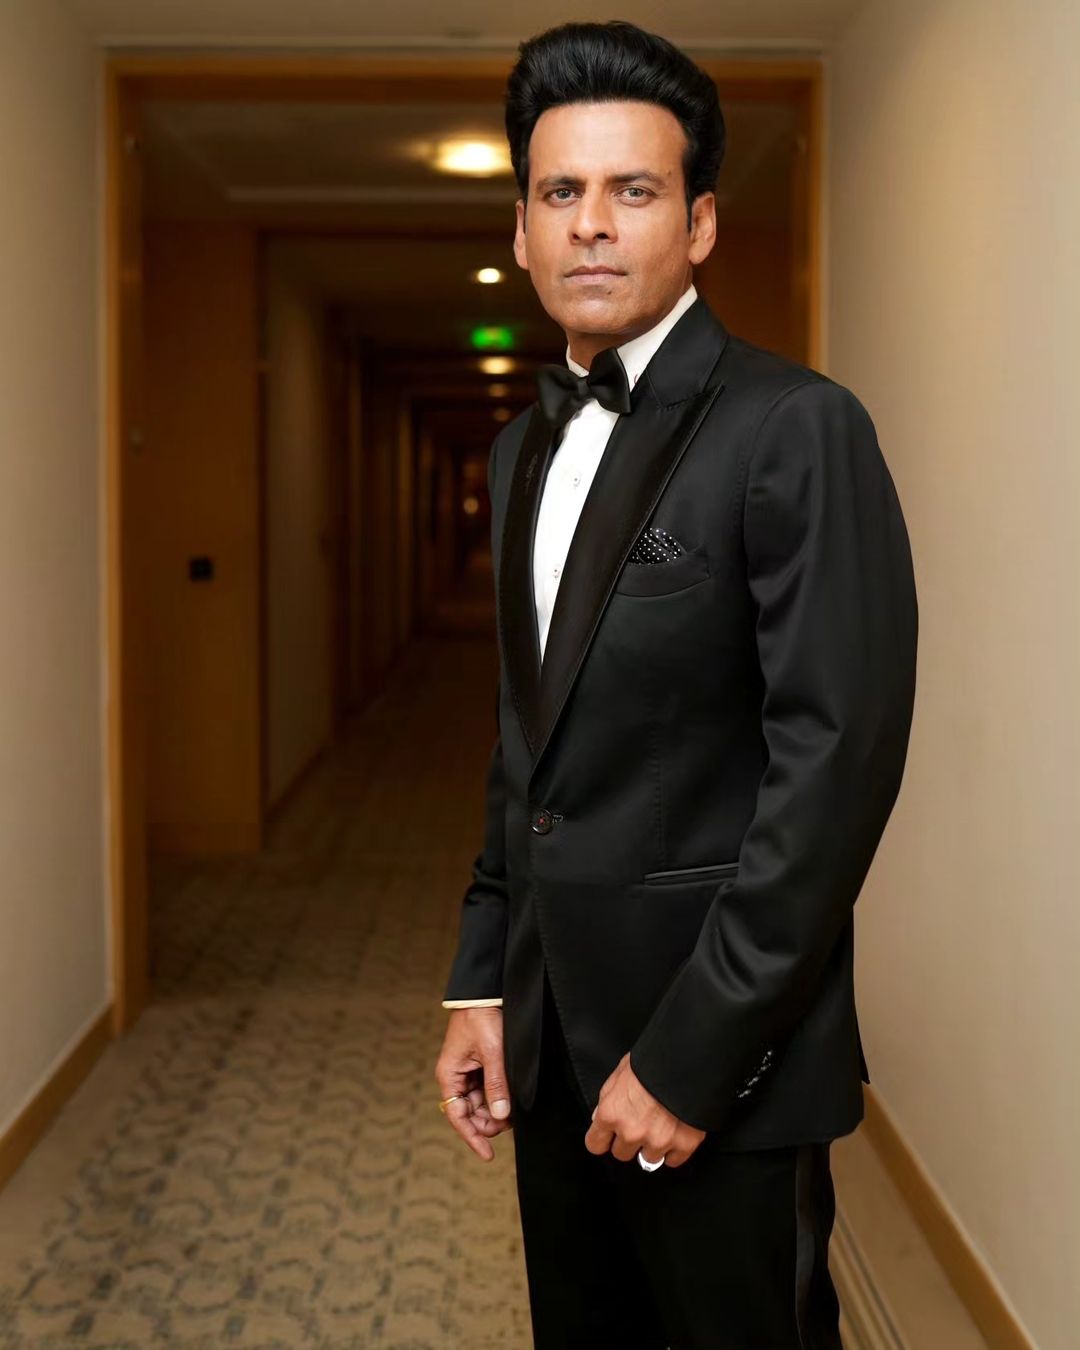 The Family Man Fame Actor Manoj Bajpayee Dwells On The Past. He Remembers His Last Conversation With Sushant Singh Rajput. Check More Details Here!